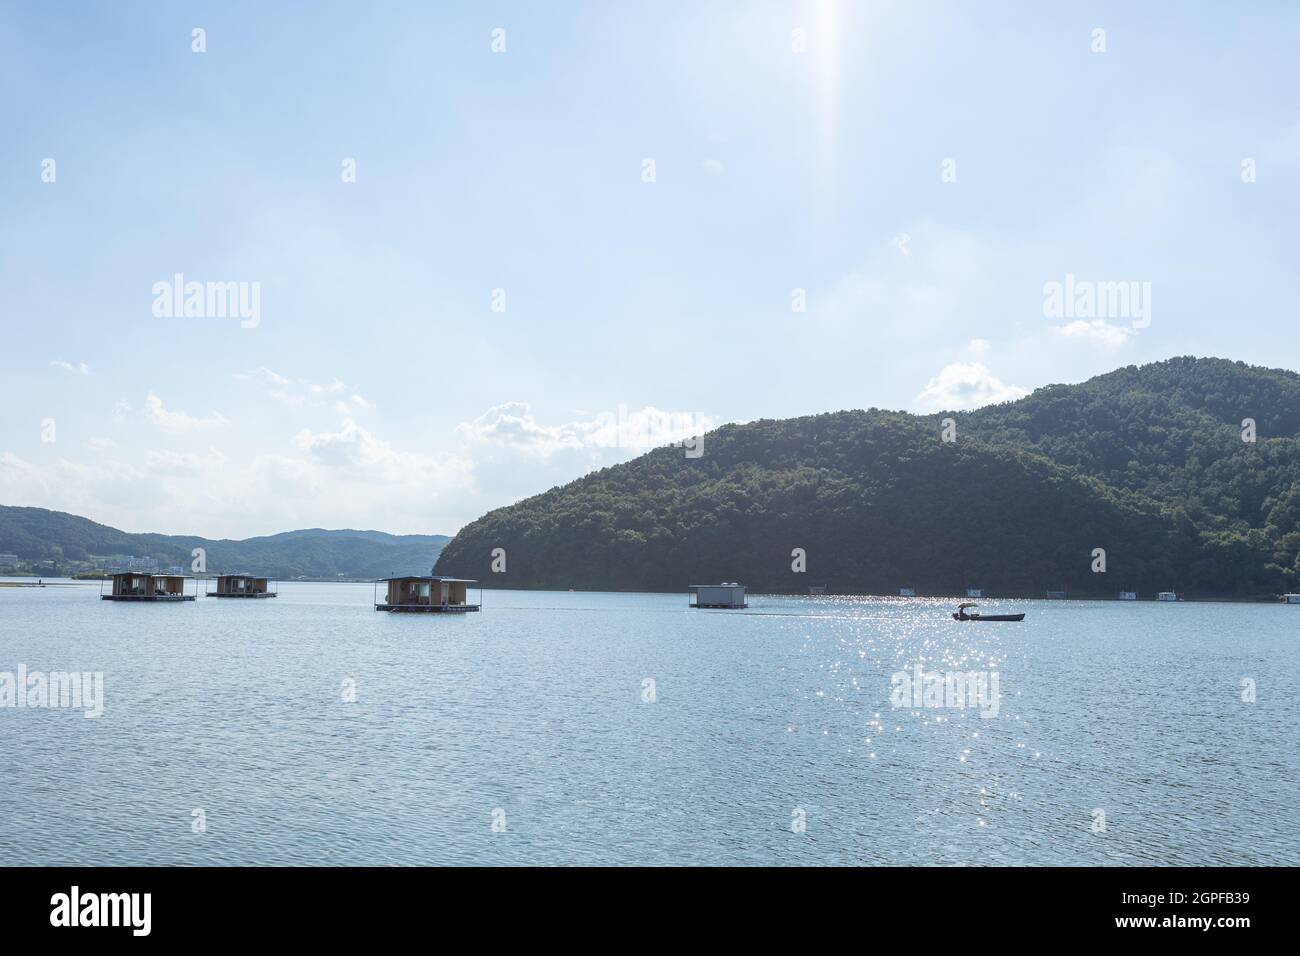 fishing seats on the water with passing boat, Idong reservoir, Yongin-si, Korea Stock Photo